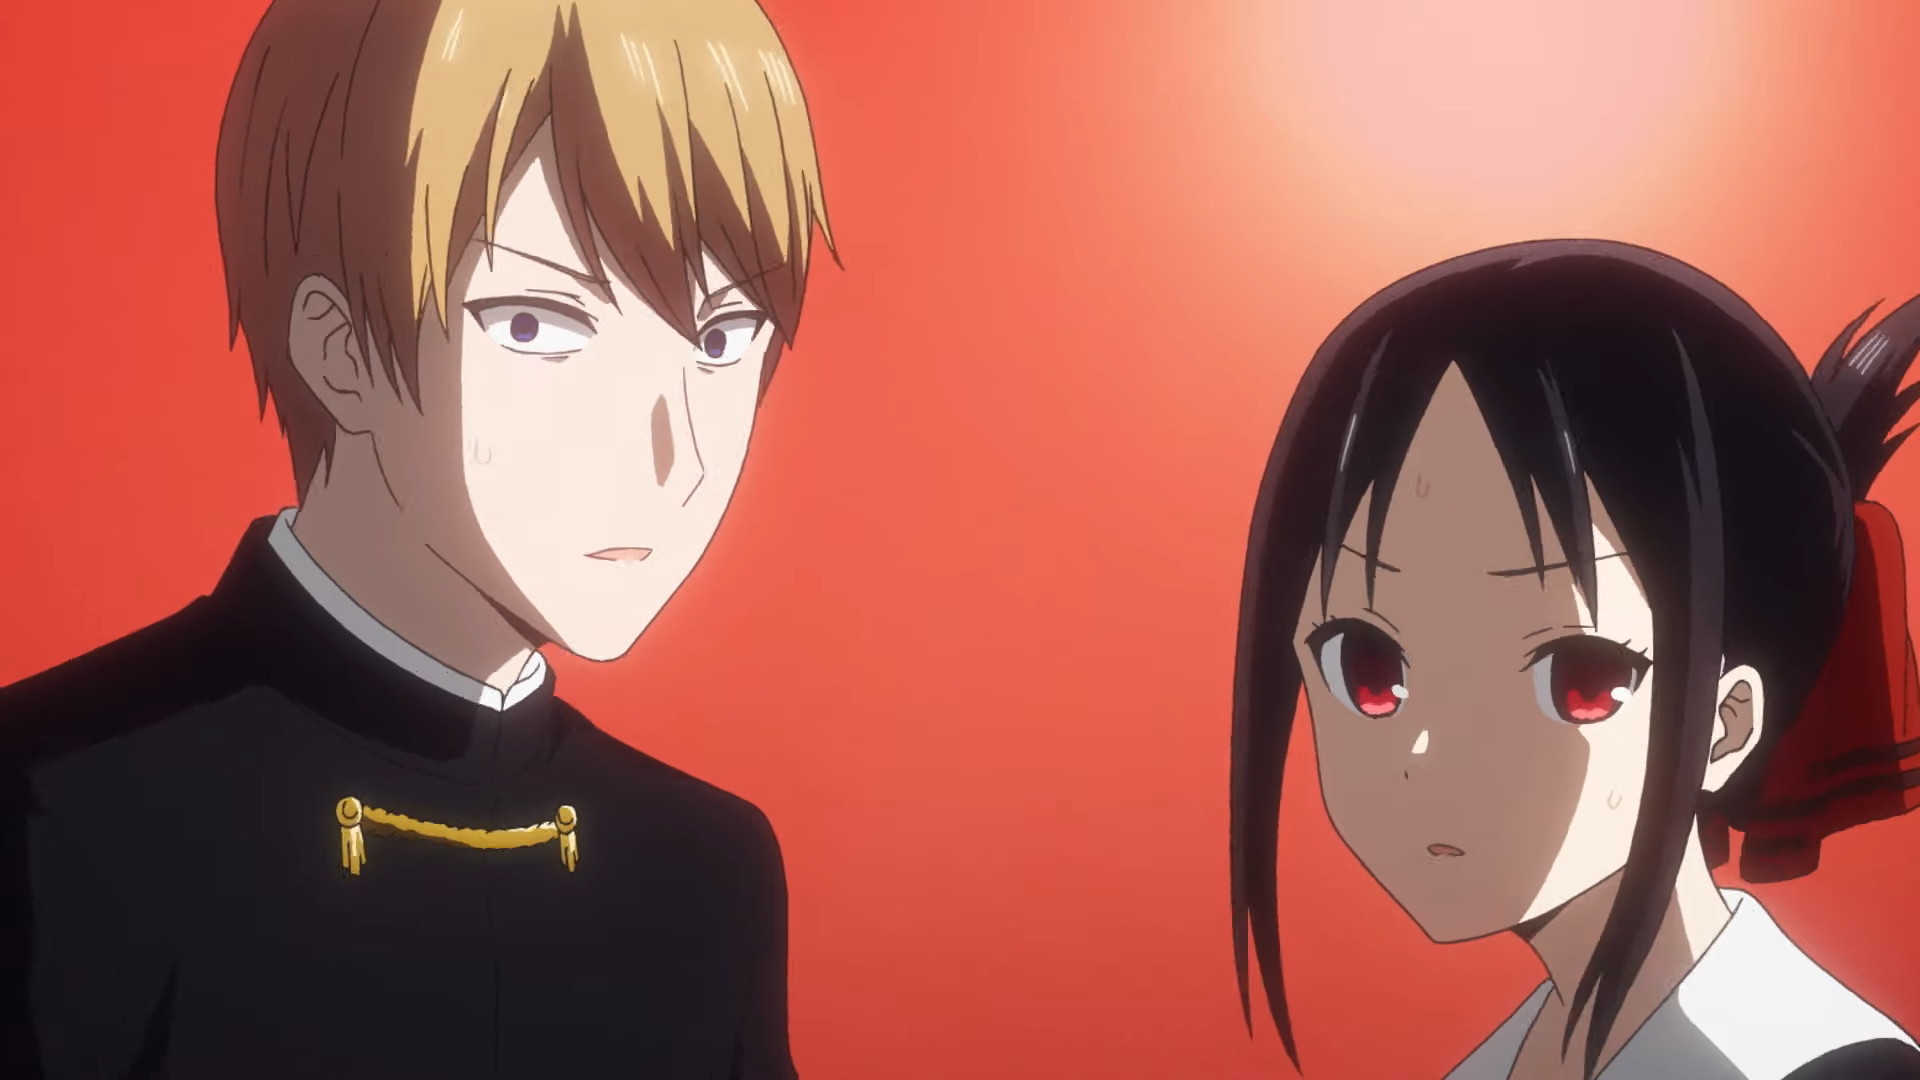 New Kaguya-sama: Love Is War Anime Is in the Works, Format Unknown